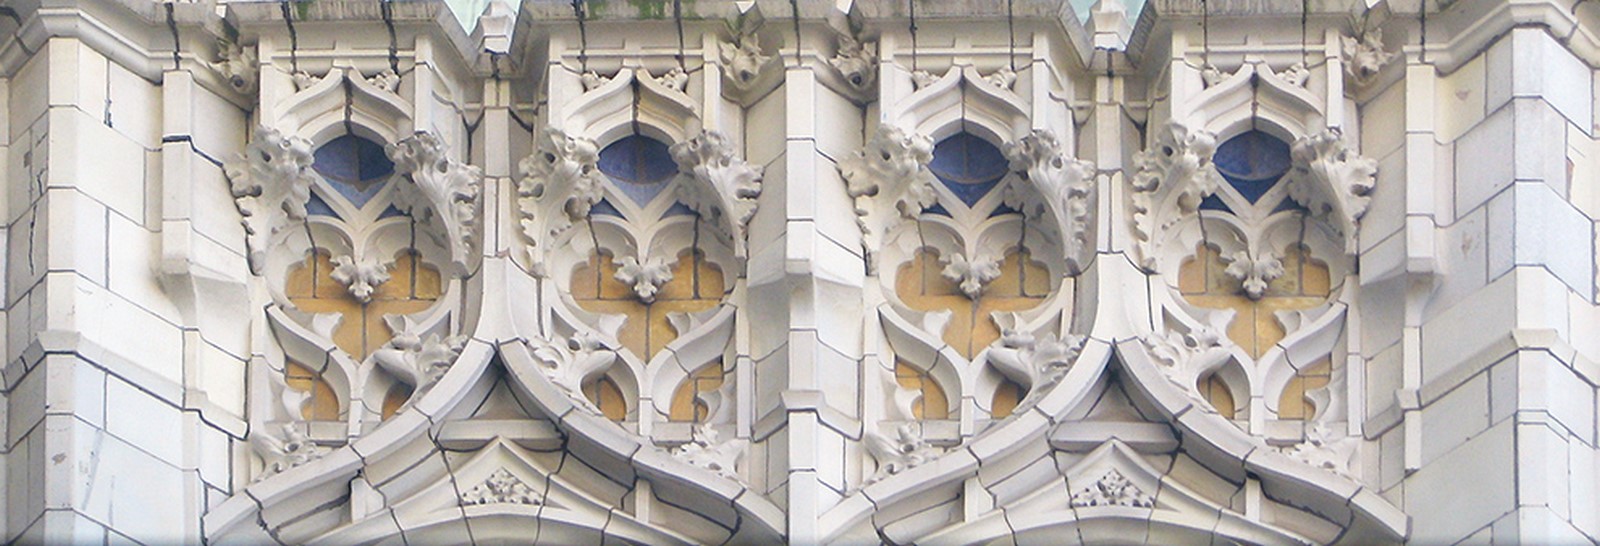 Woolworth Building by Cass Gilbert: Anchor of the New York City - Sheet11